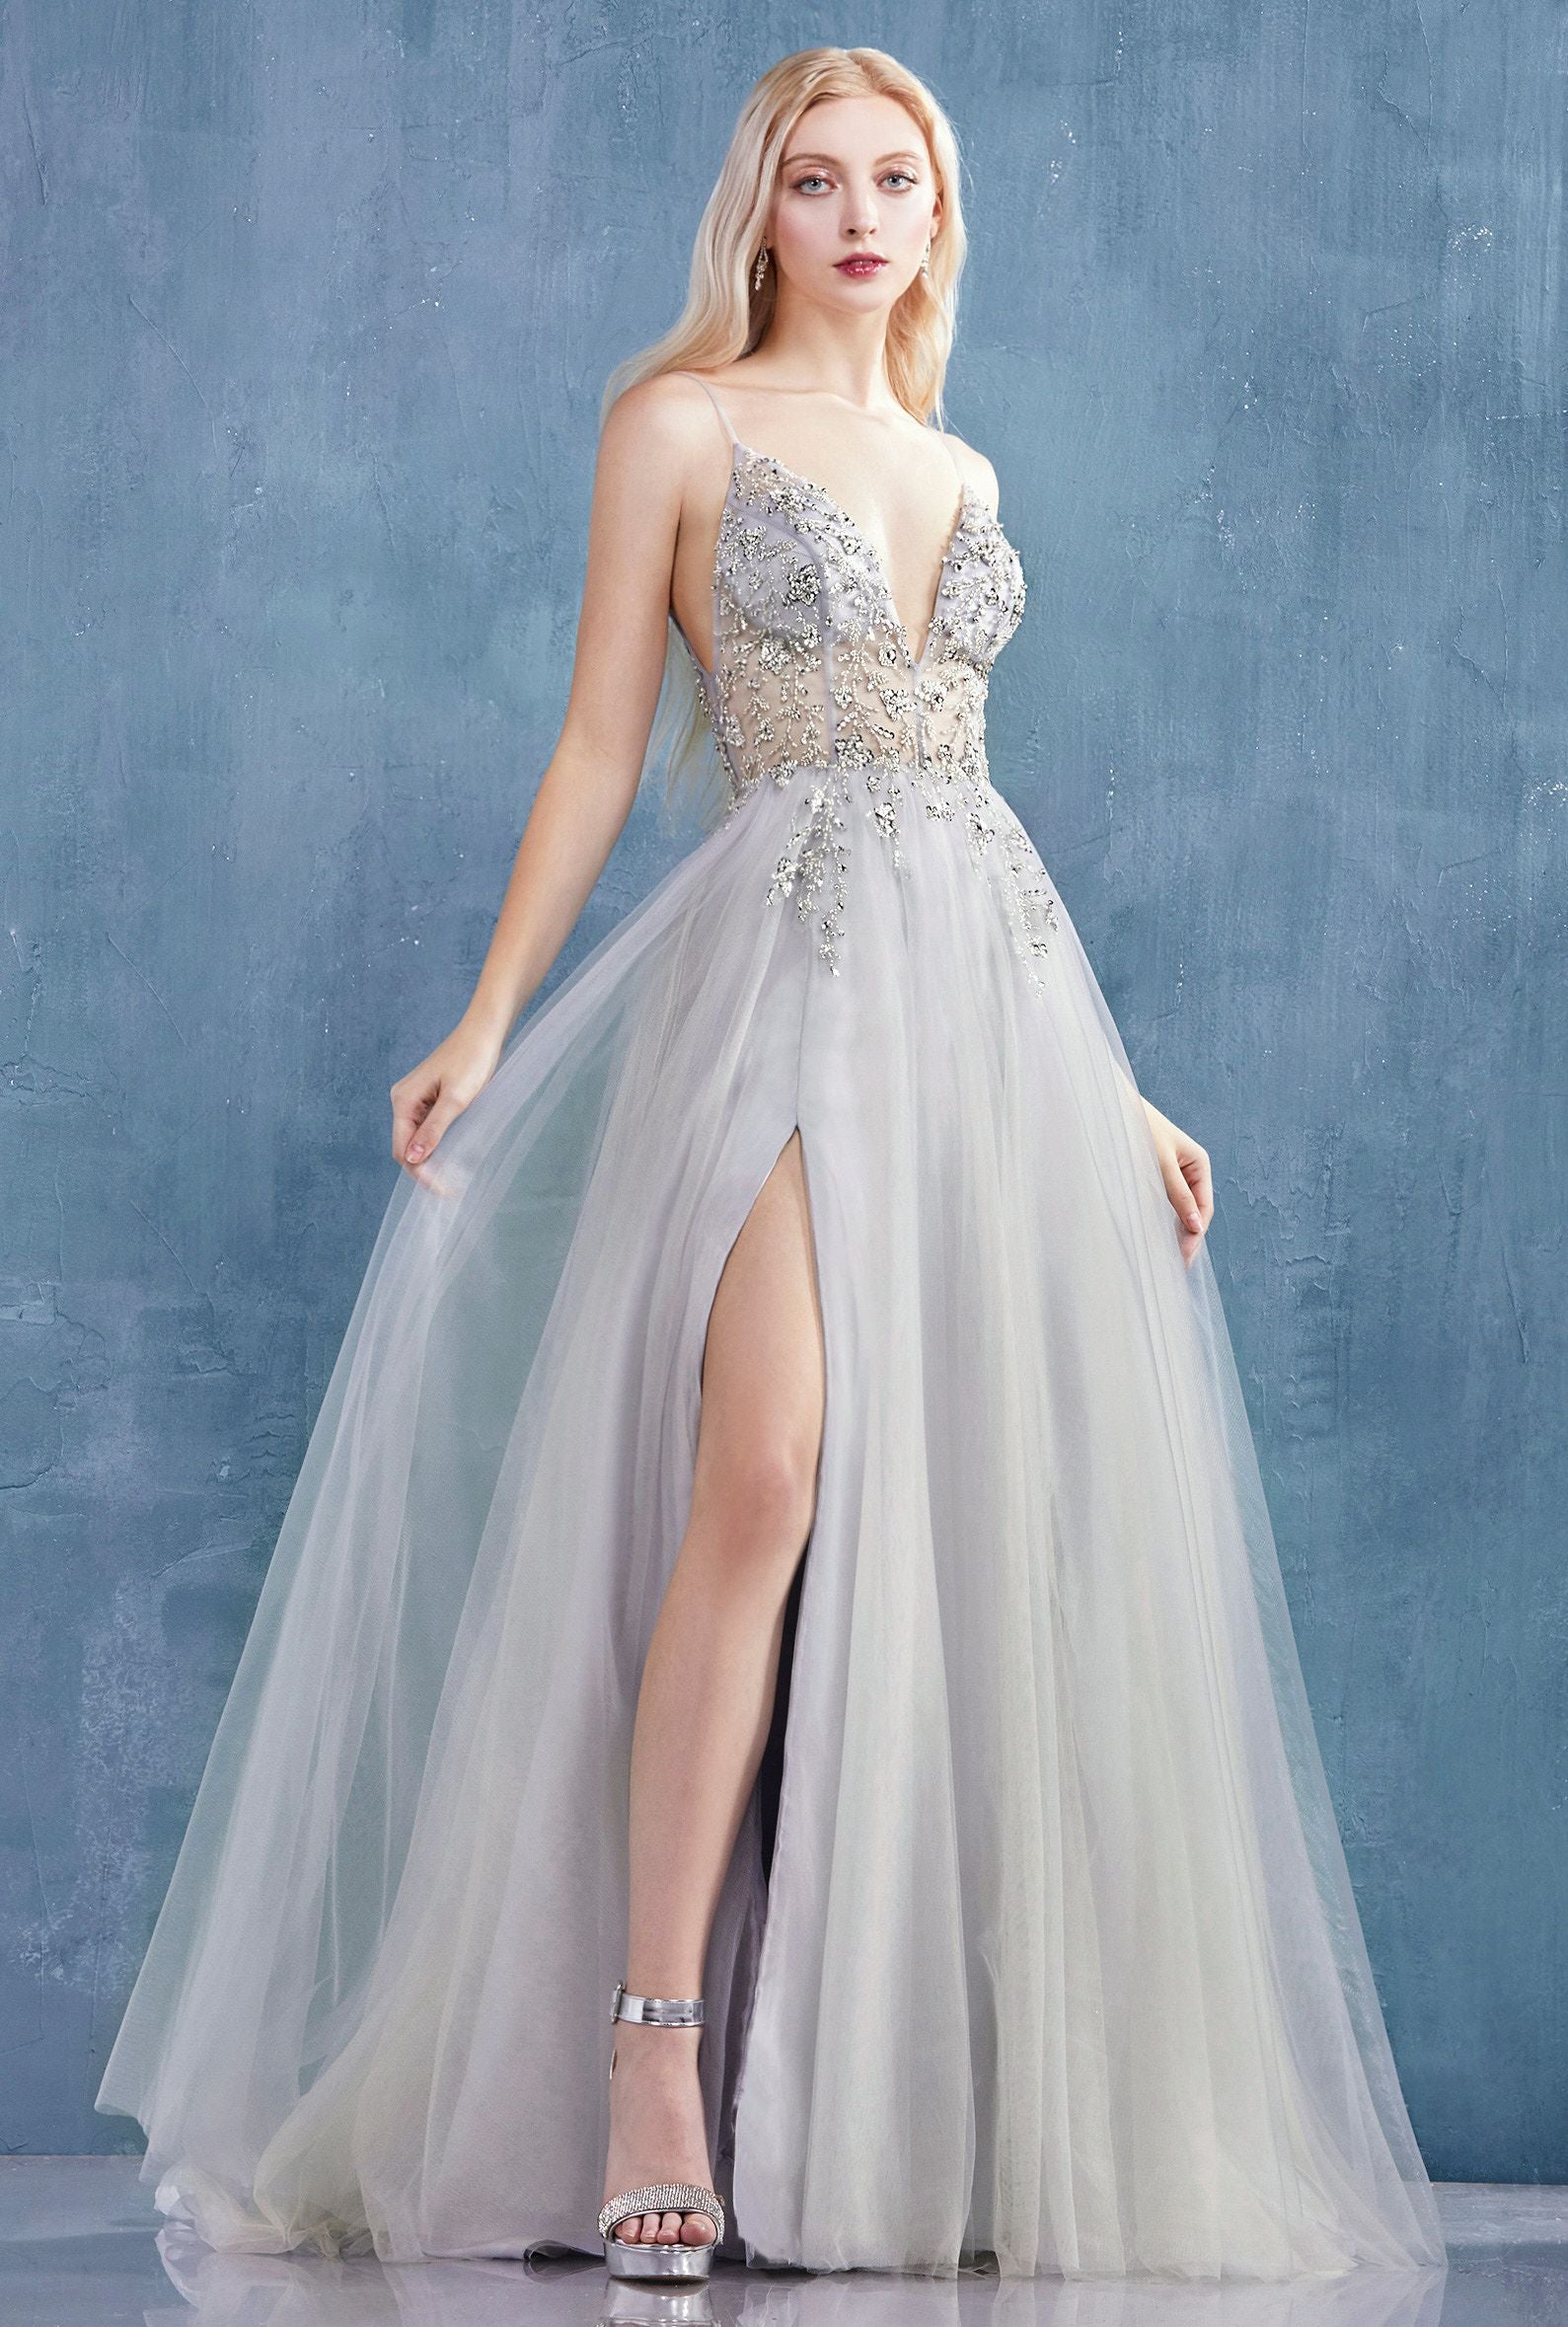 MyFashion.com - V-NECK ETHEREAL FLORAL BEADED TULLE A-LINE WITH LEG SLIT(A0672) - Andrea&Leo promdress eveningdress fashion partydress weddingdress 
 gown homecoming promgown weddinggown 